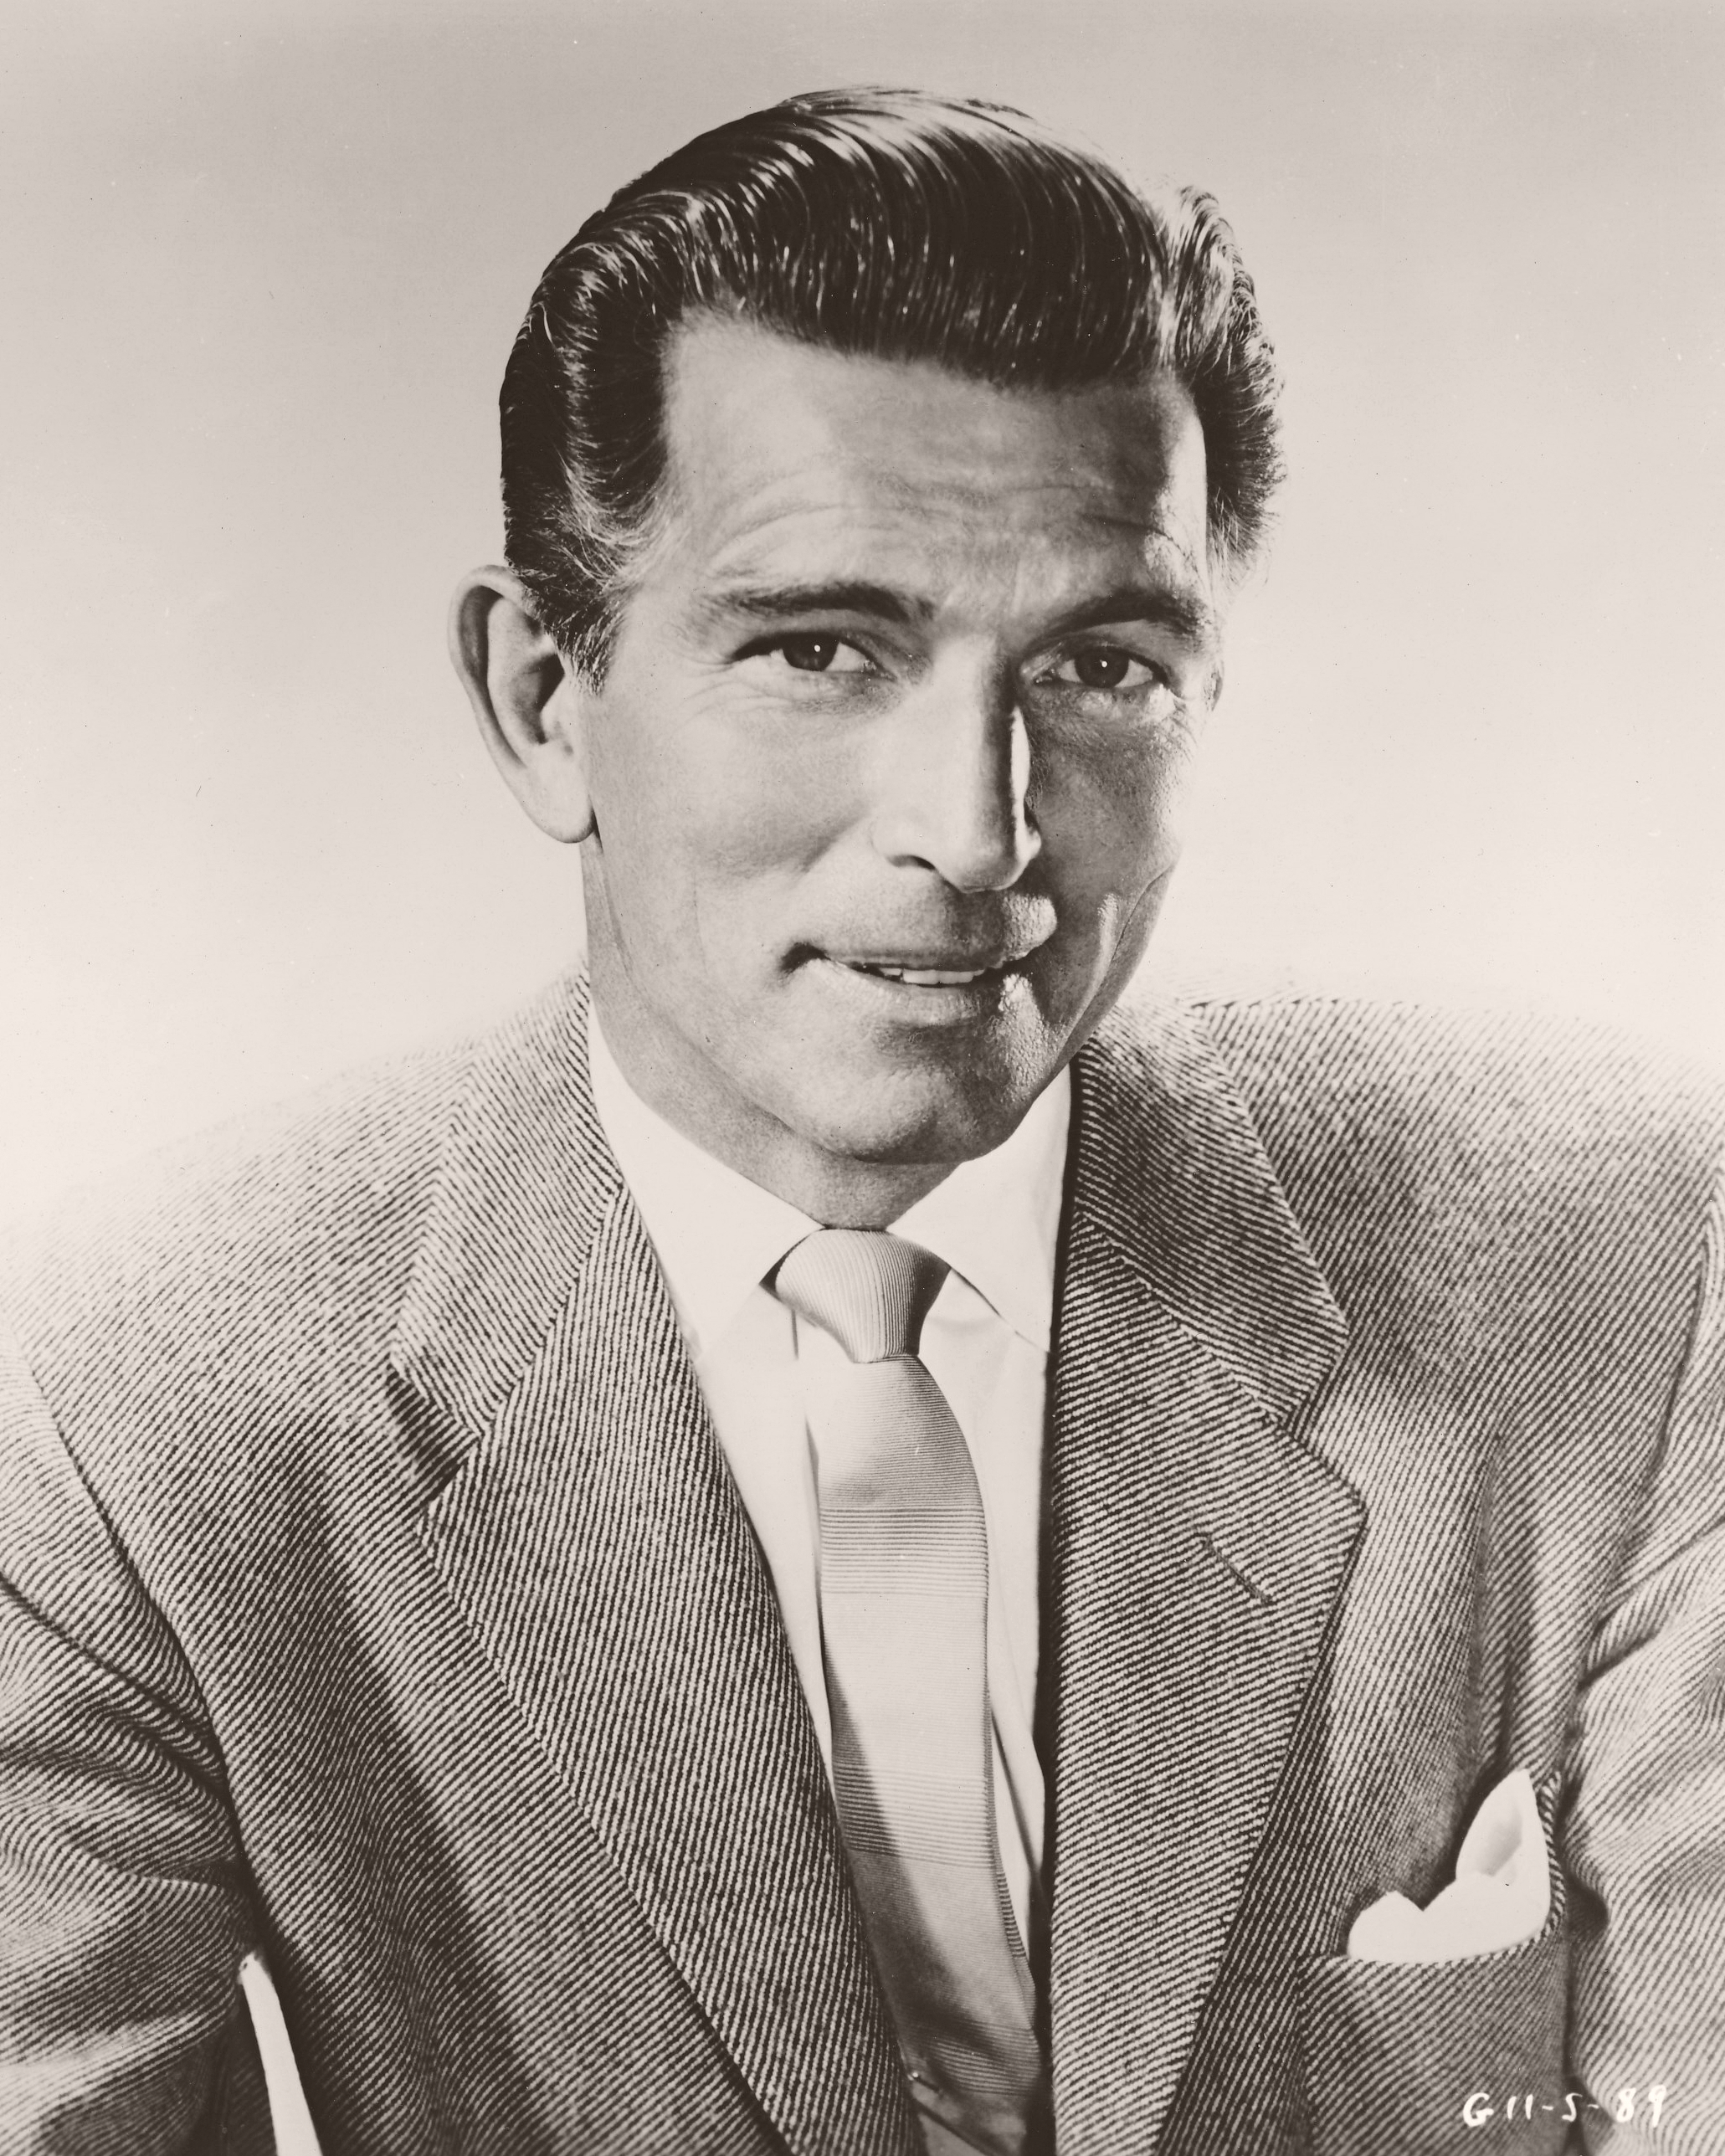 Photography of Michael Rennie, British actor, wearing a jacket and tie